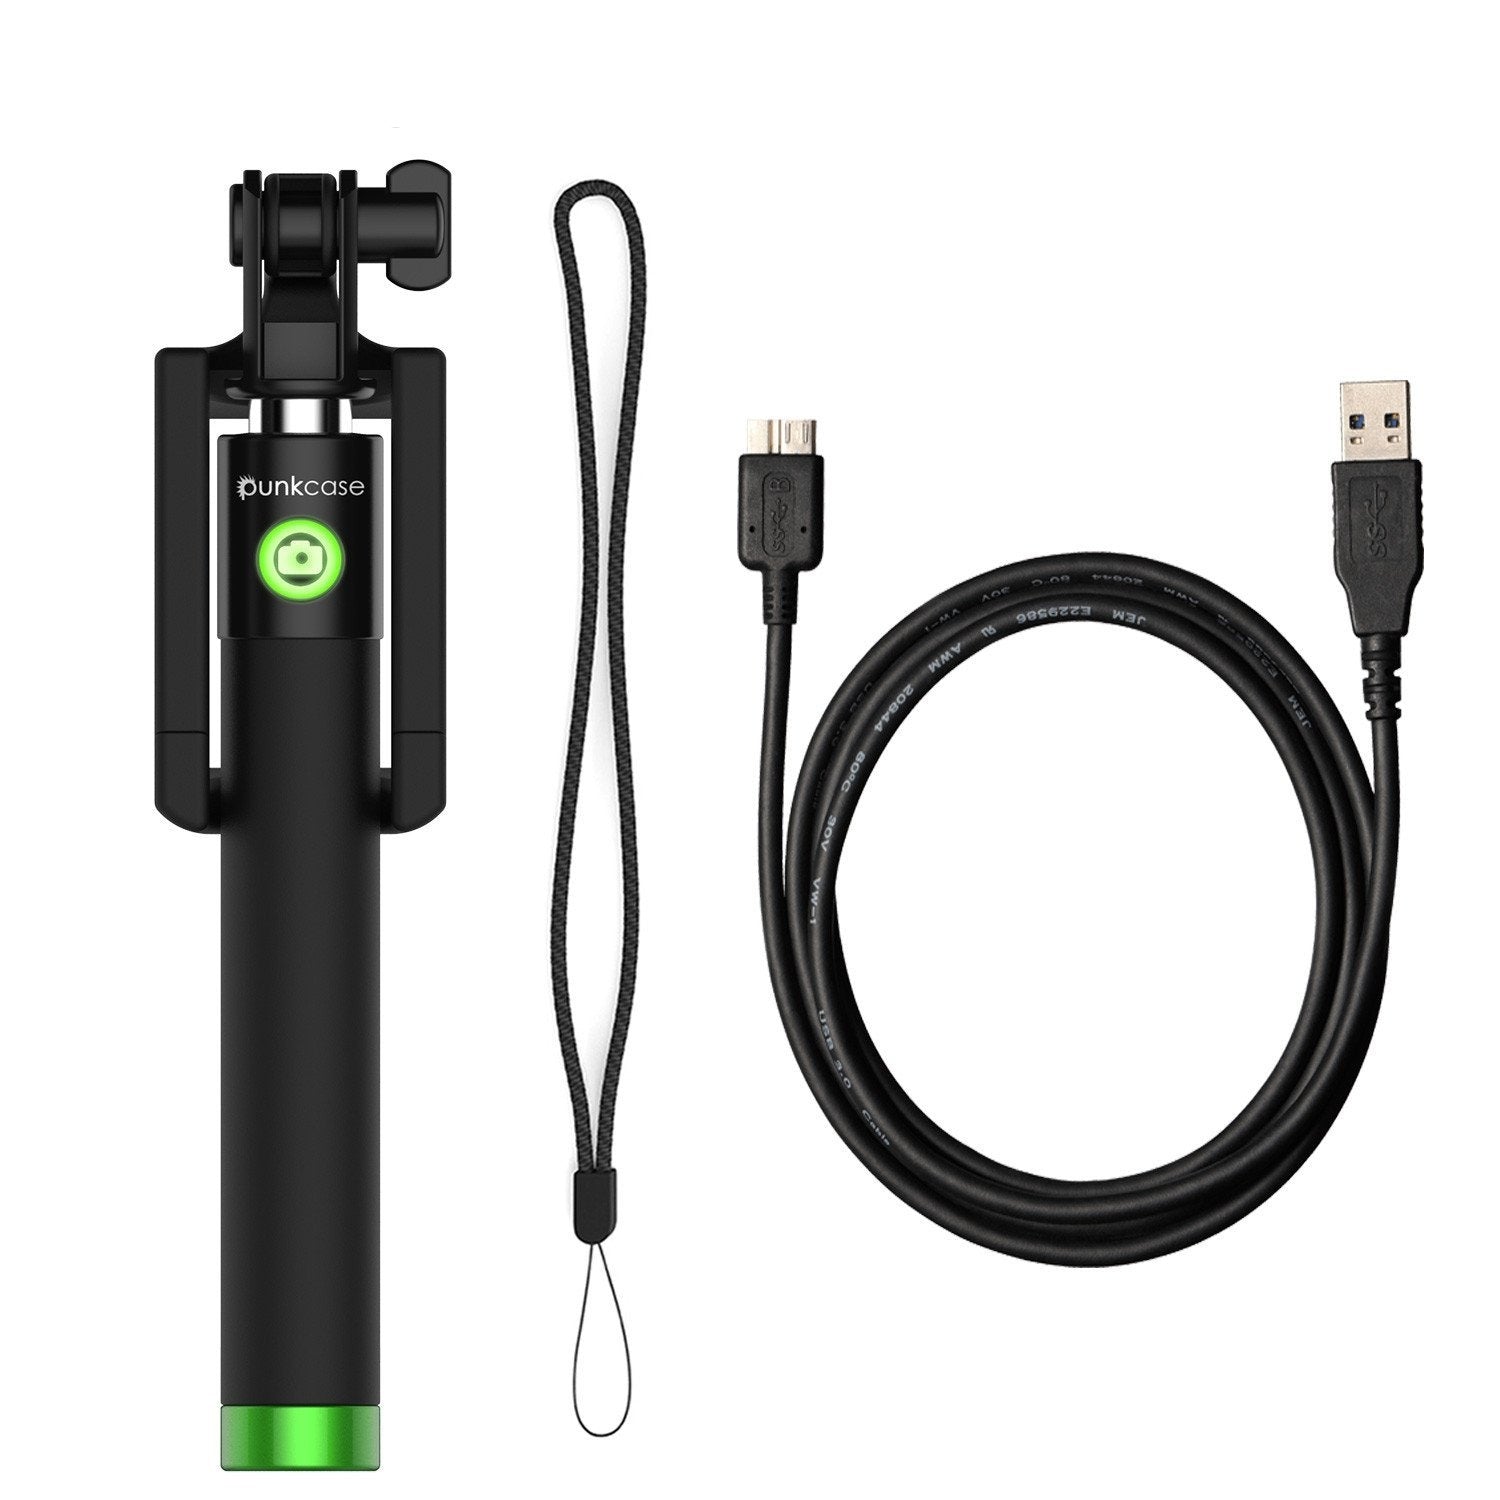 Selfie Stick - Green, Extendable Monopod with Built-In Bluetooth Remote Shutter (Color in image: Green)